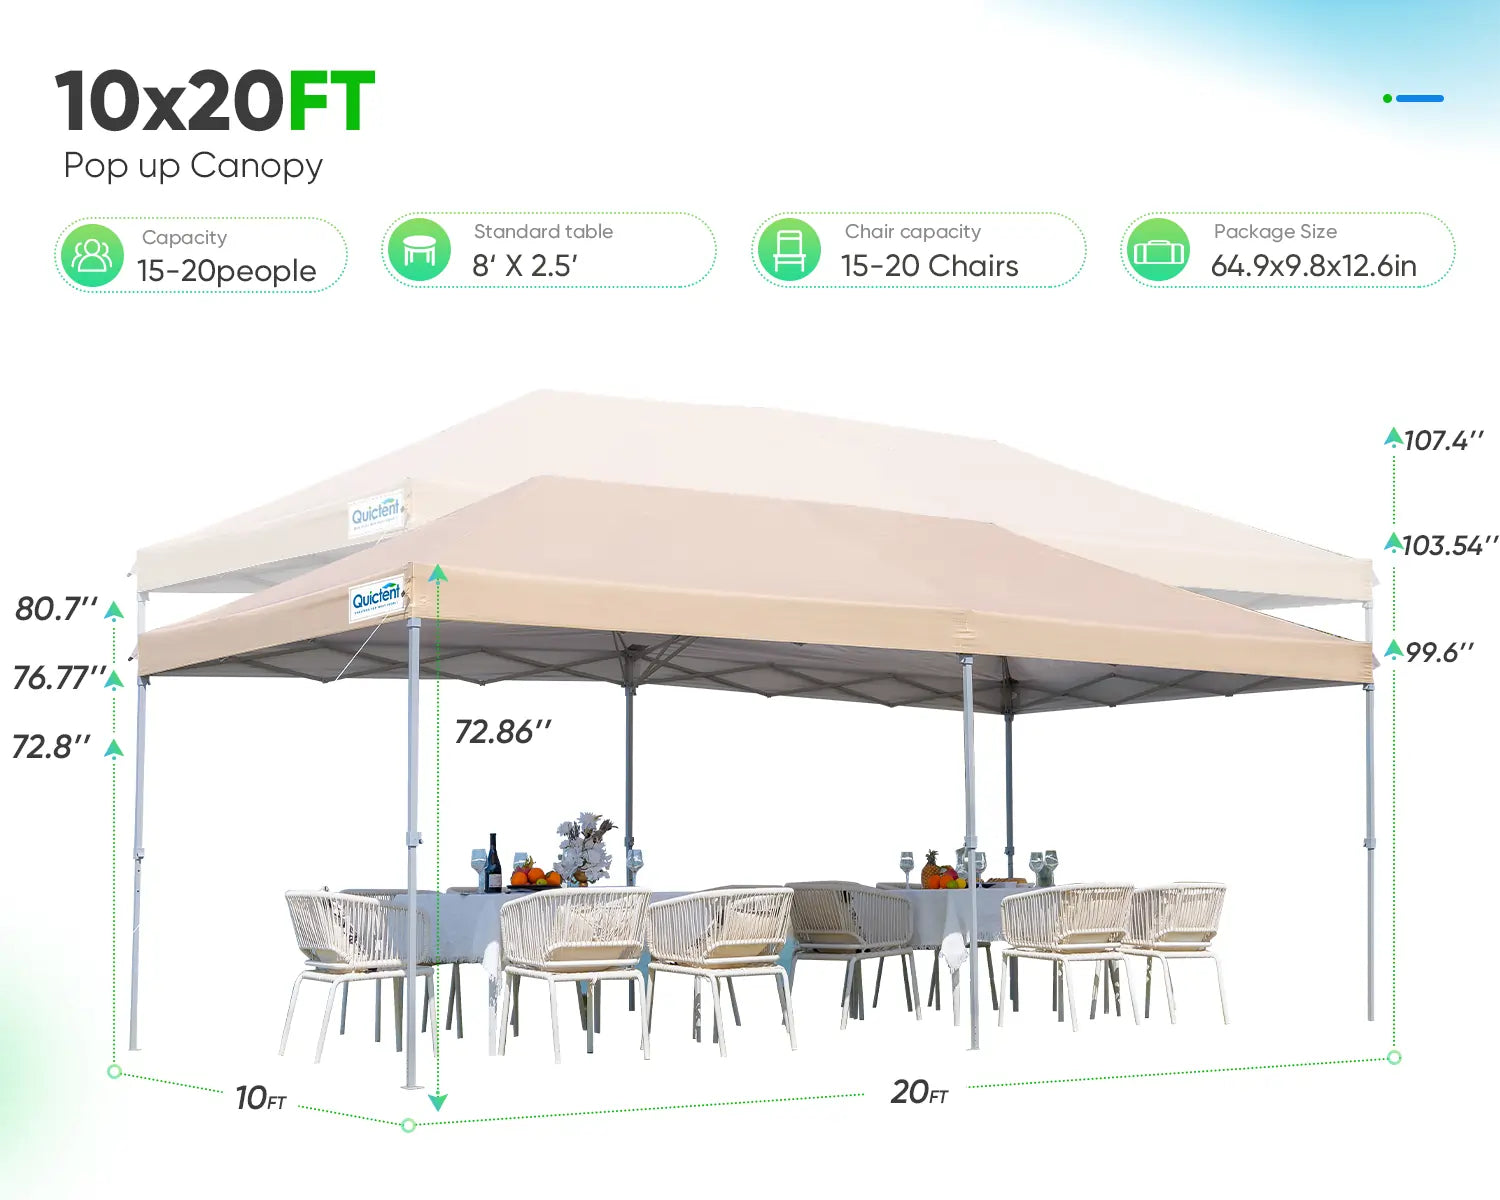 10x20 canopy tent 3 built-in height options#color_beige